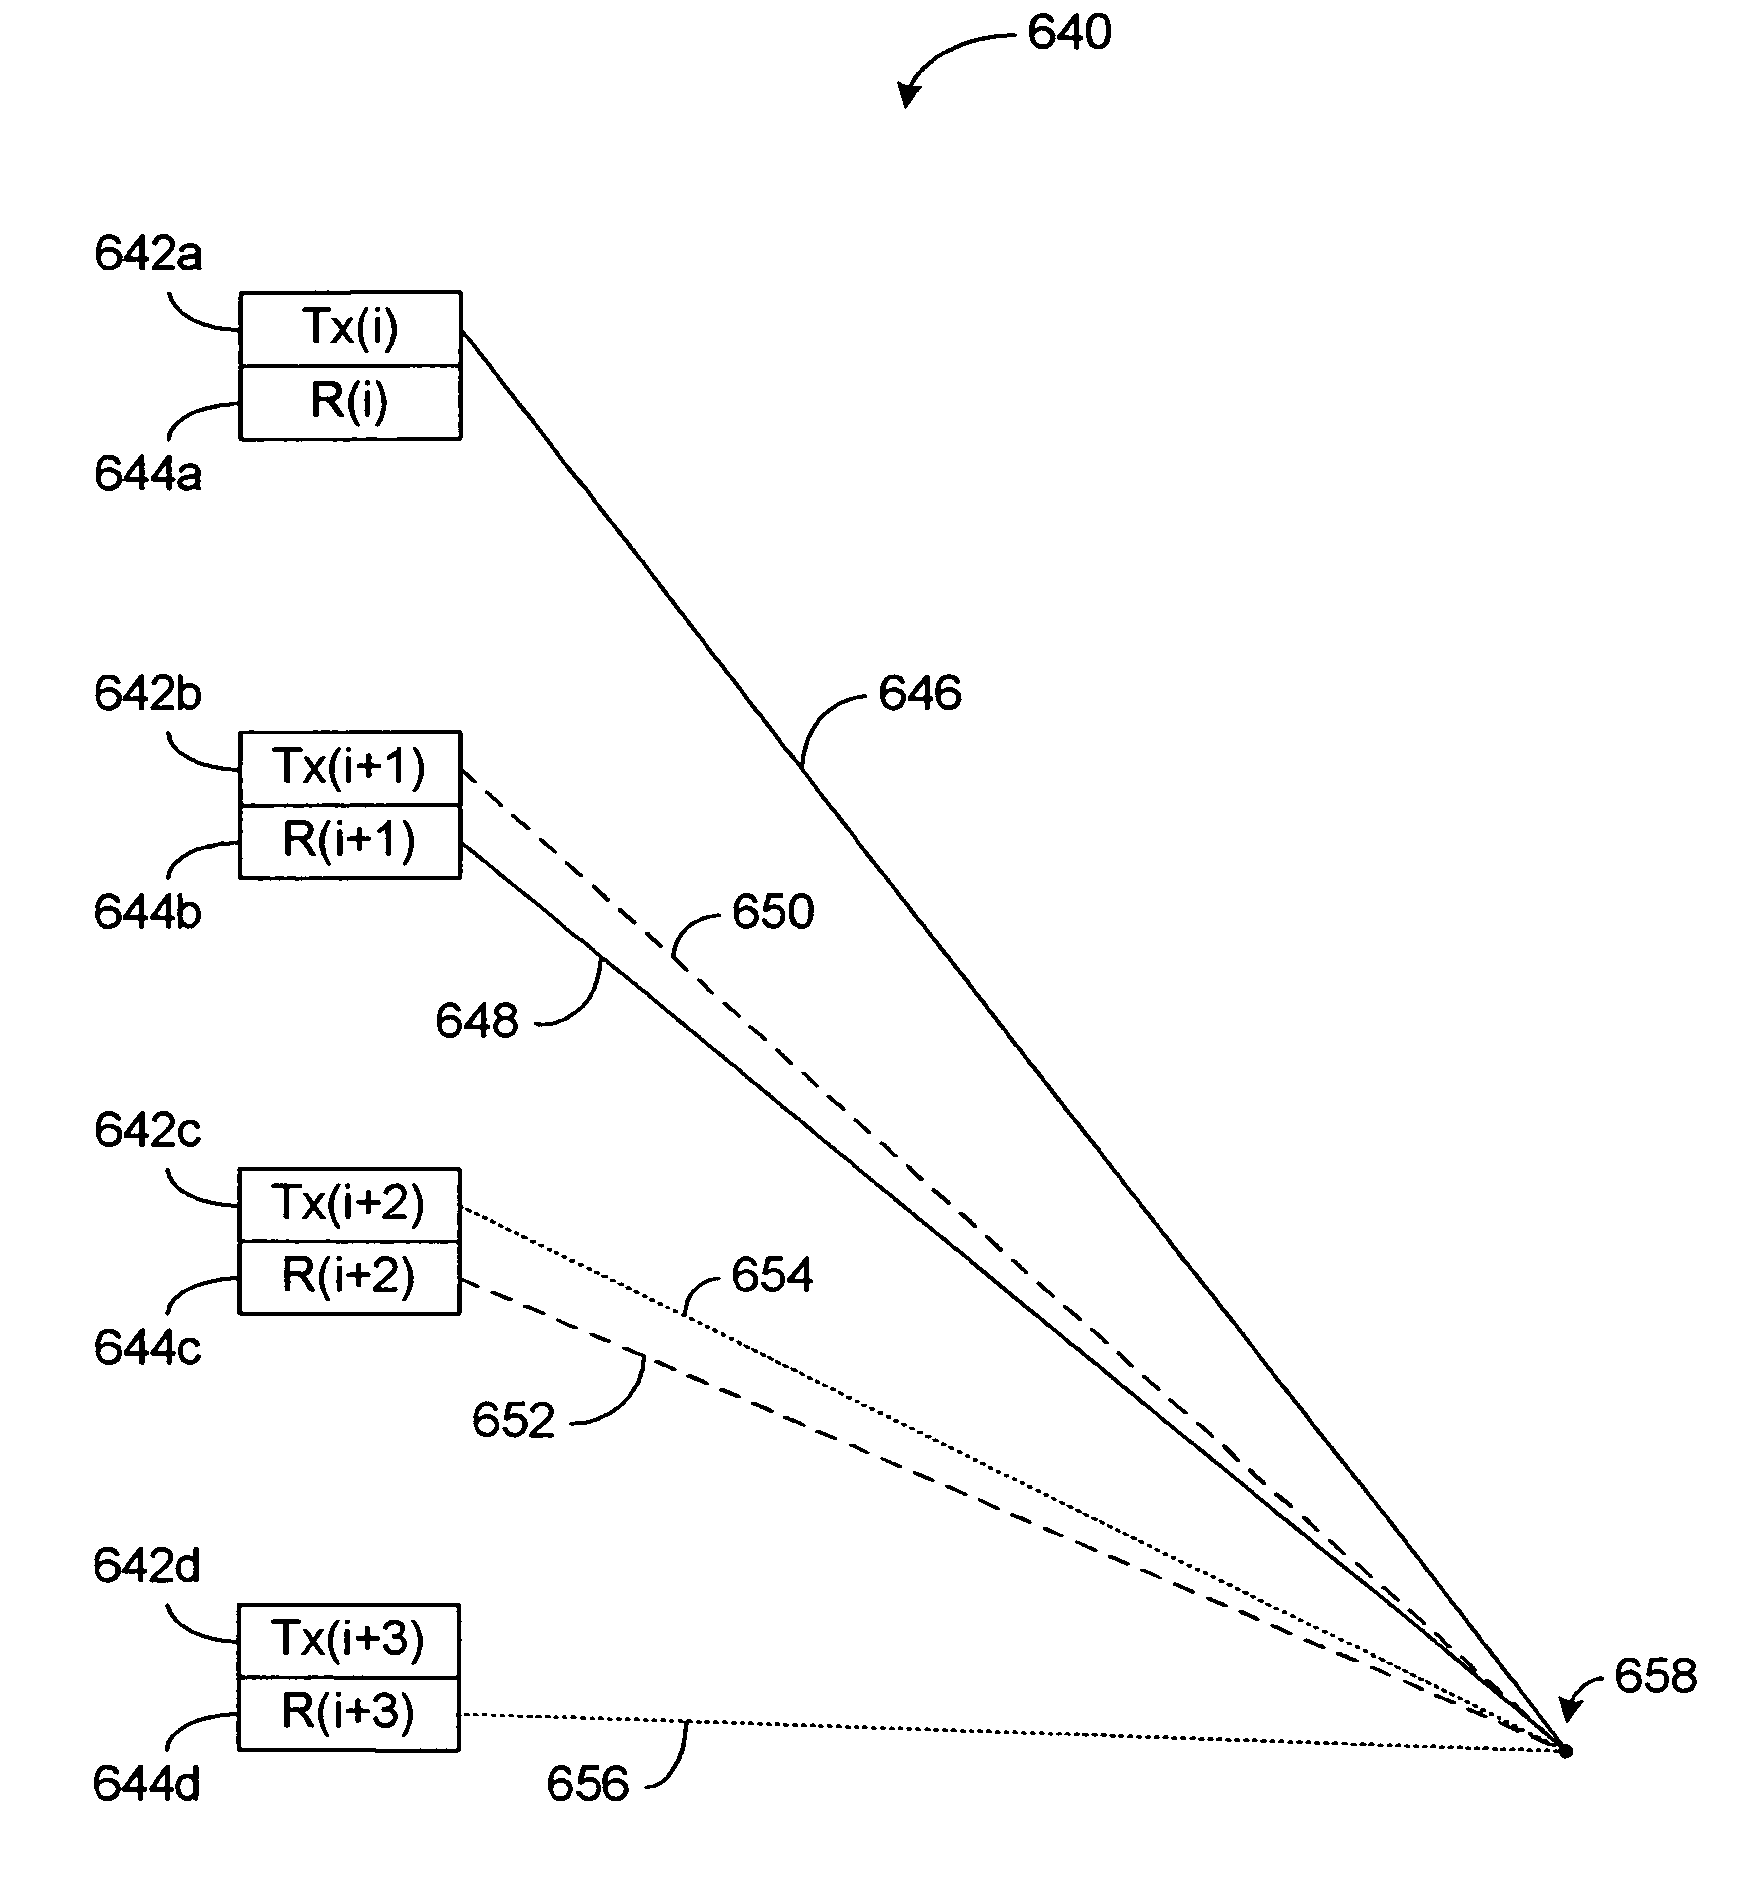 Systems and methods for ultrasound imaging